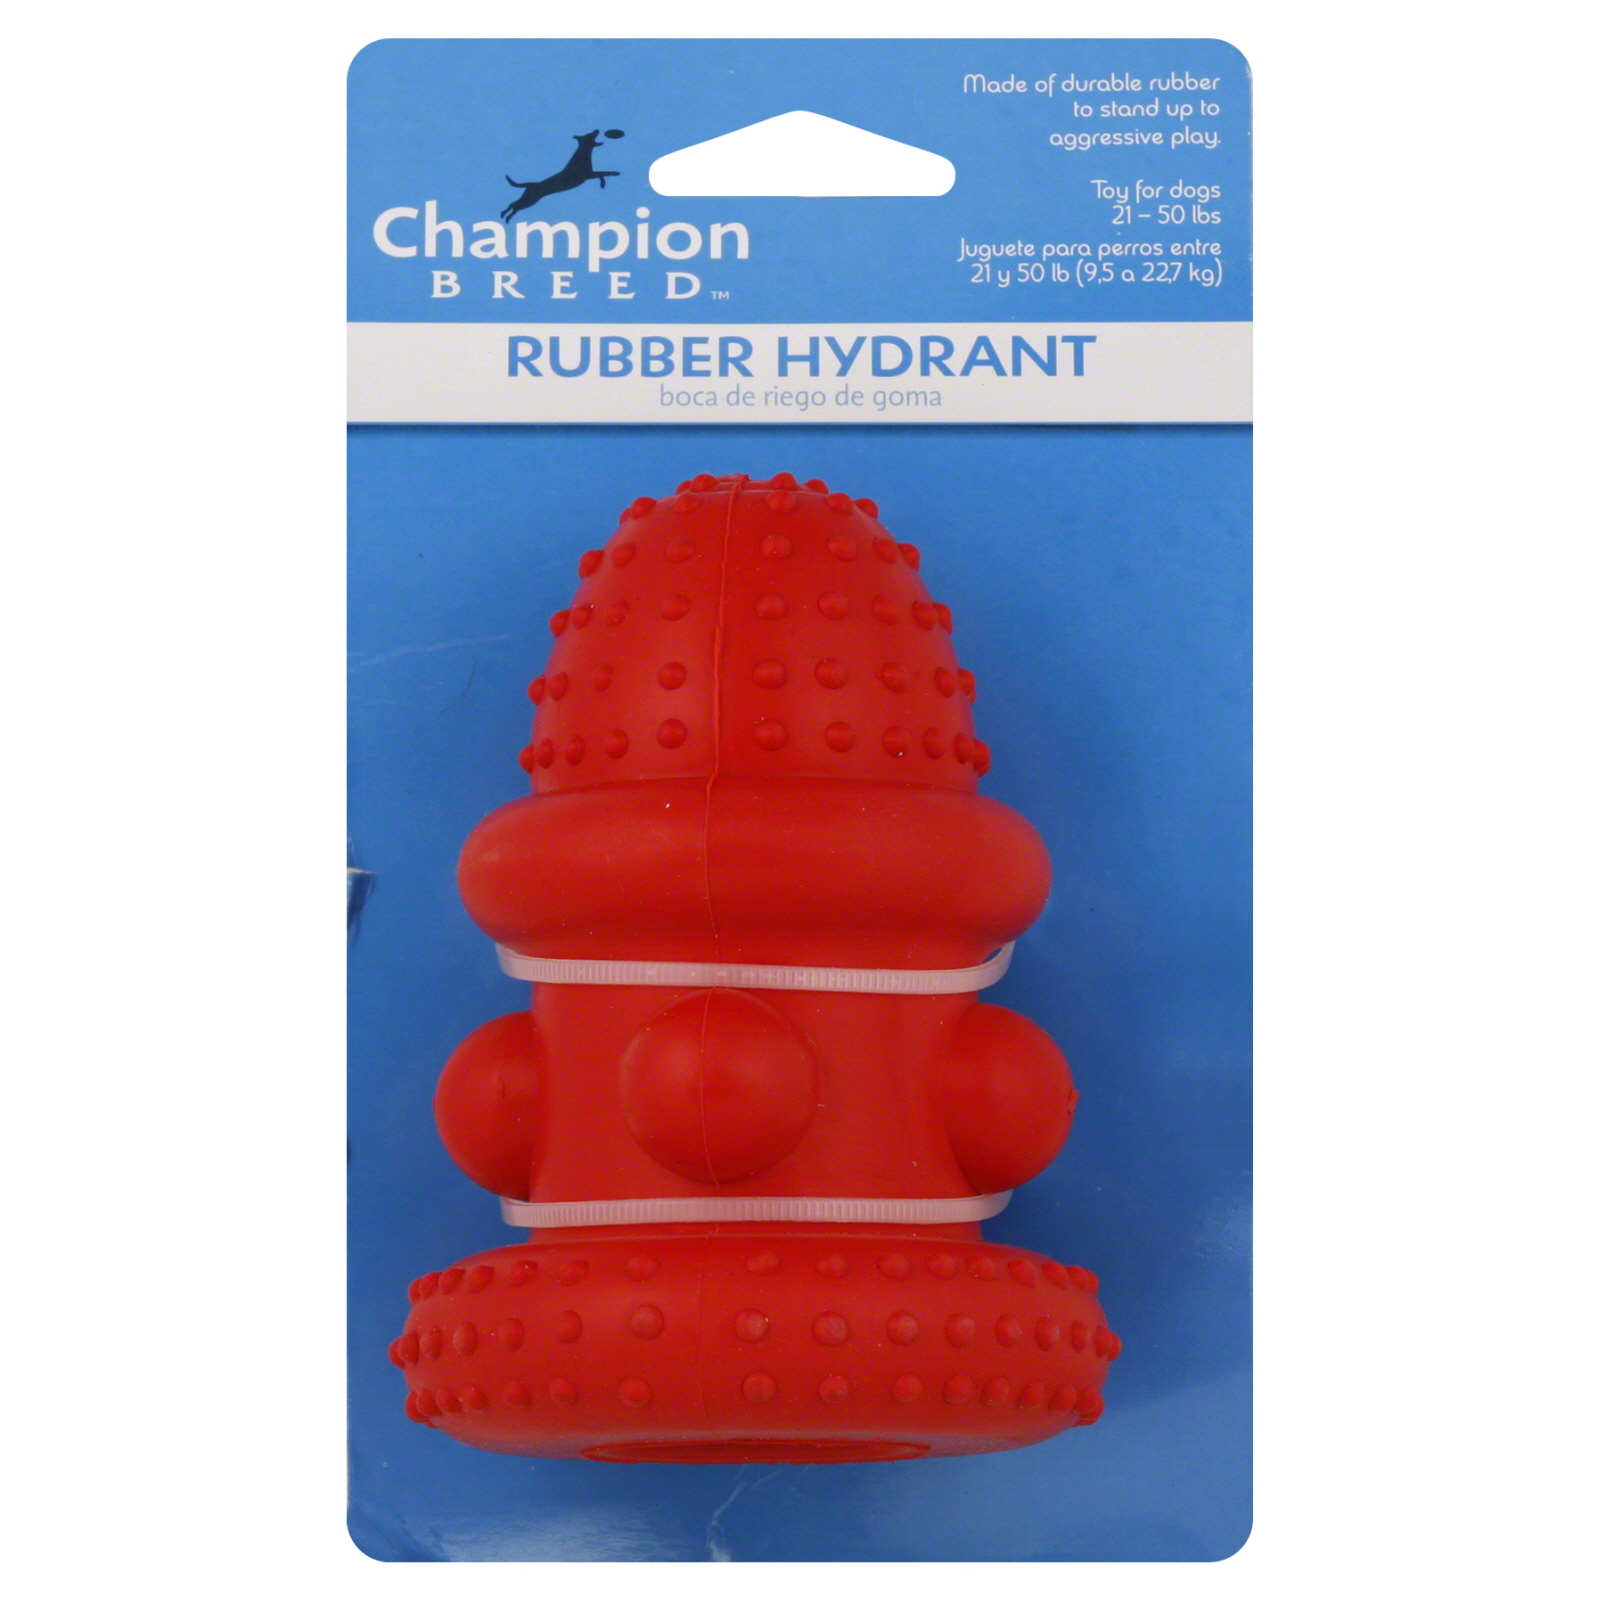 Champion Breed Rubber Hydrant Dog Toy